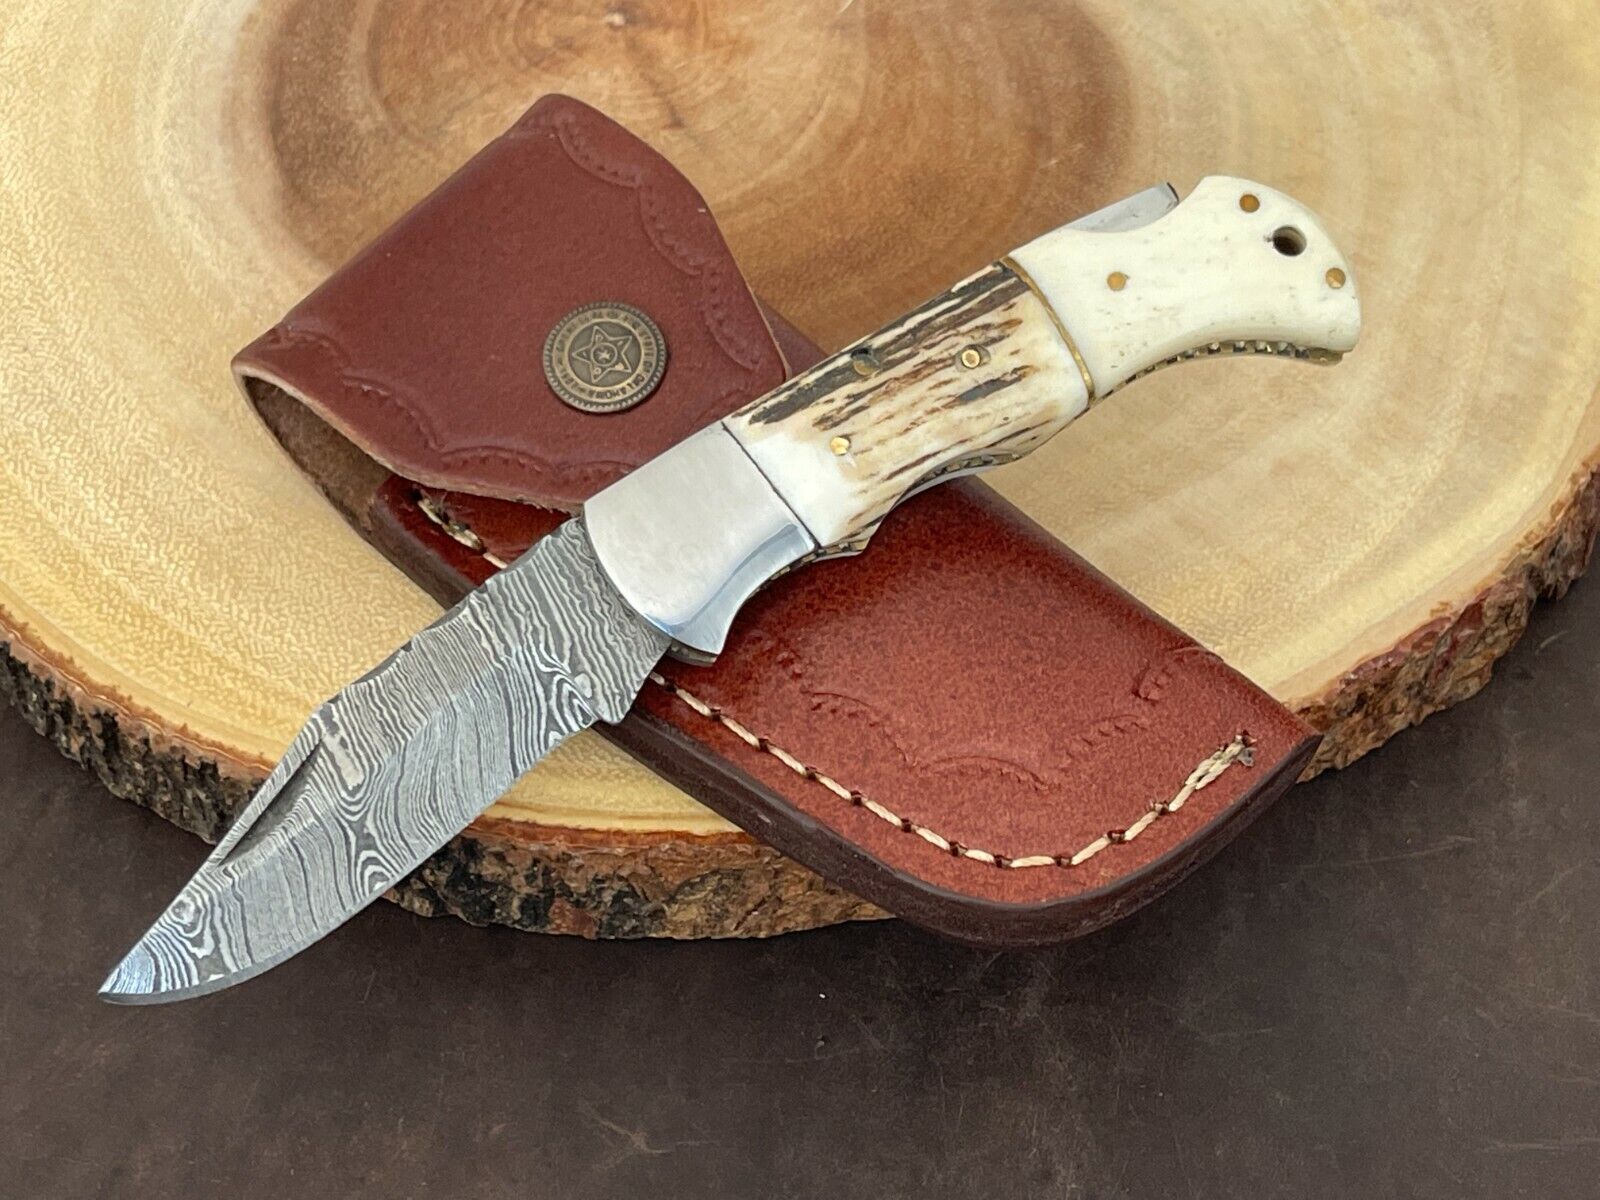 Damascus Folding Pocket Knife With Small Defects Handmade (See Description)